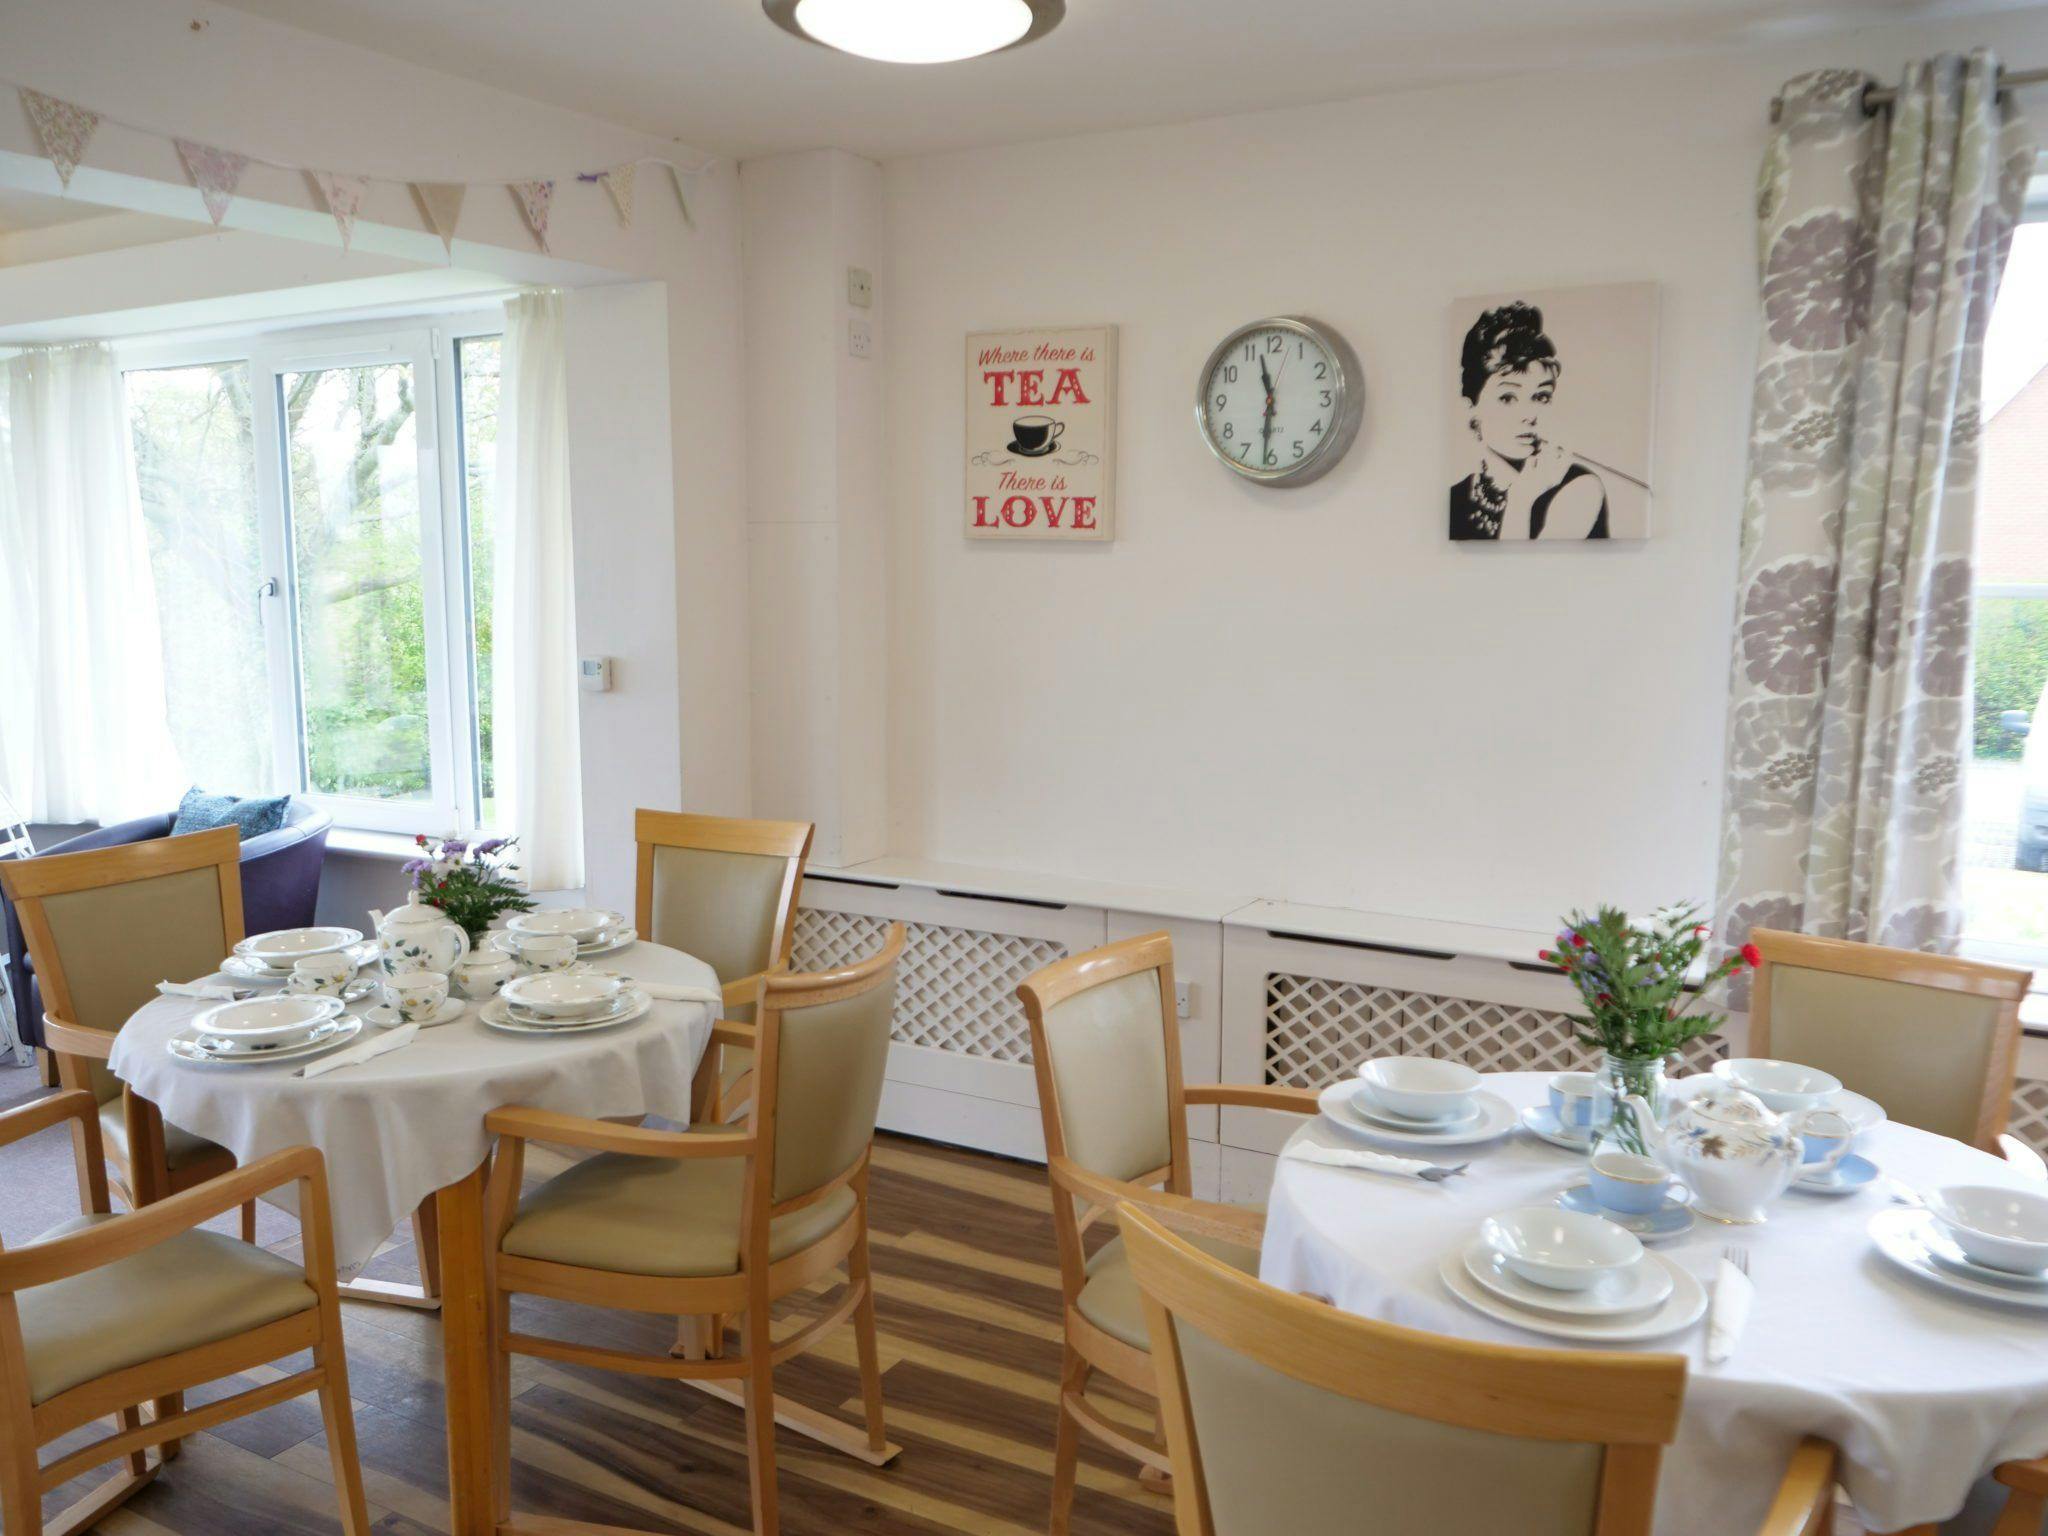 Dining room of Hartley House care home in Cranbrook, Kent,